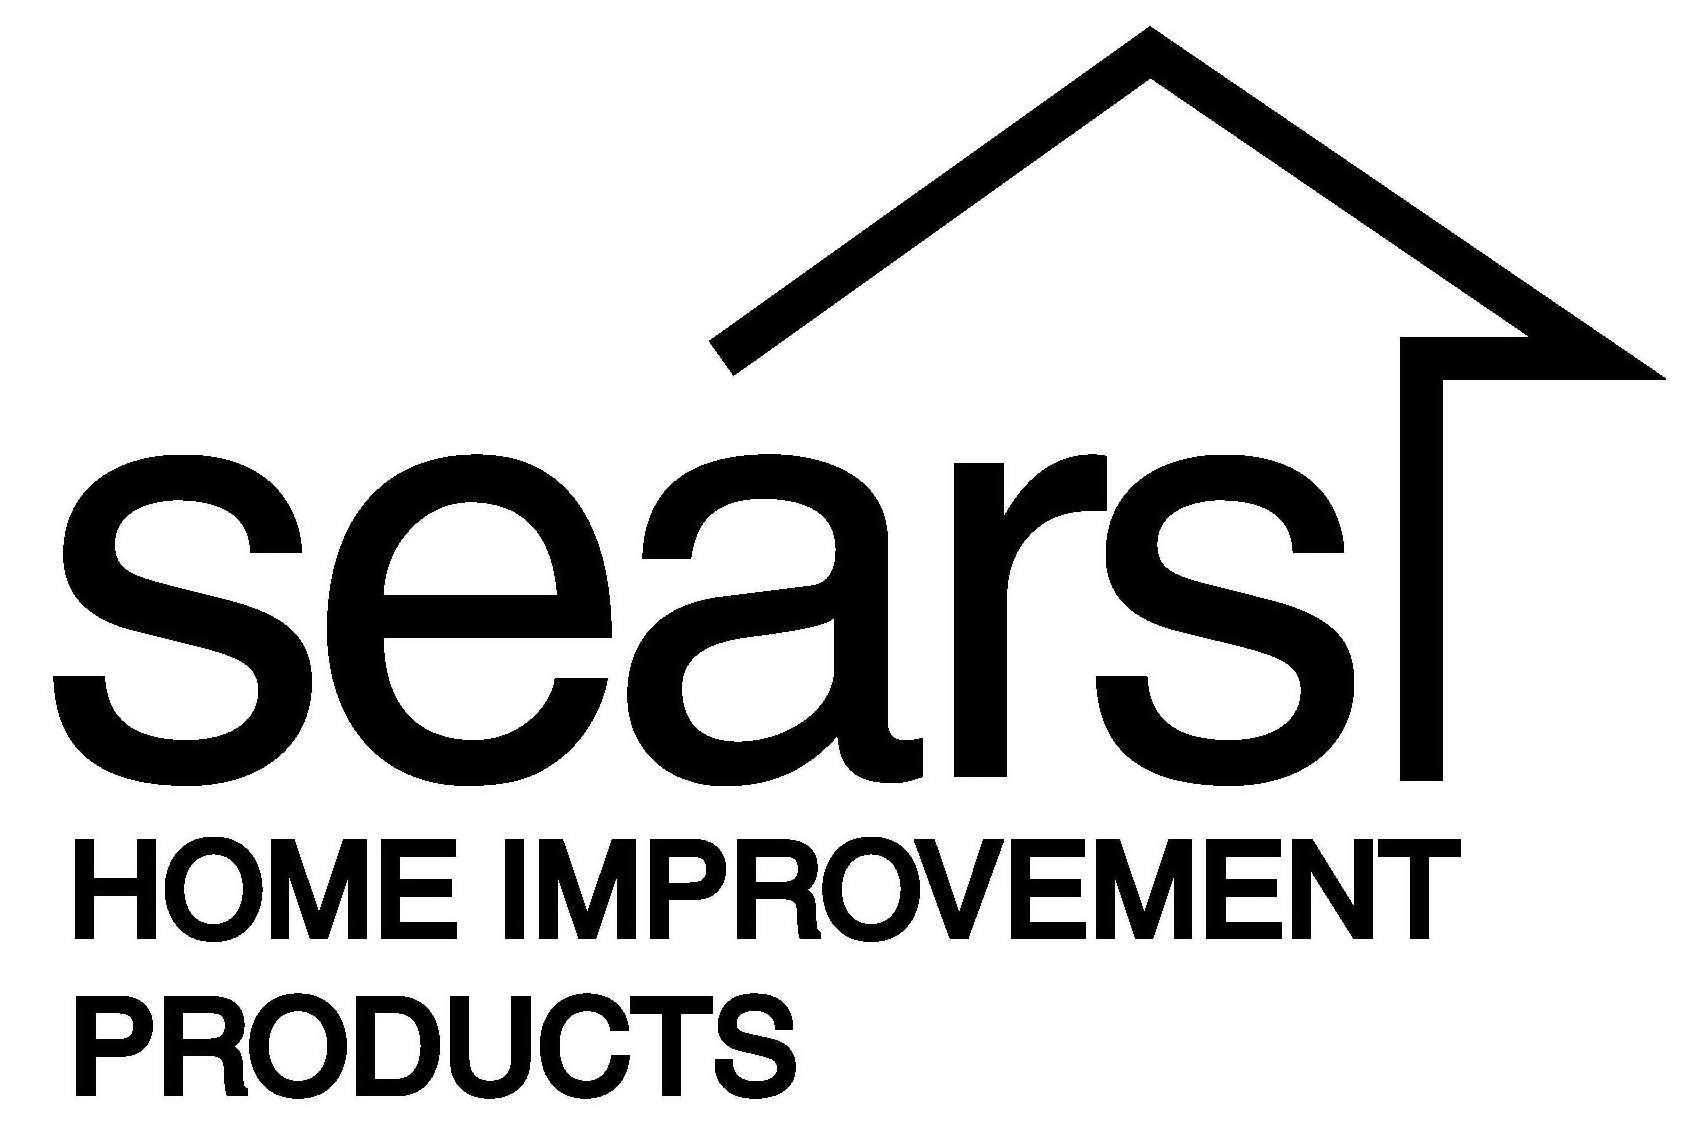  SEARS HOME IMPROVEMENT PRODUCTS